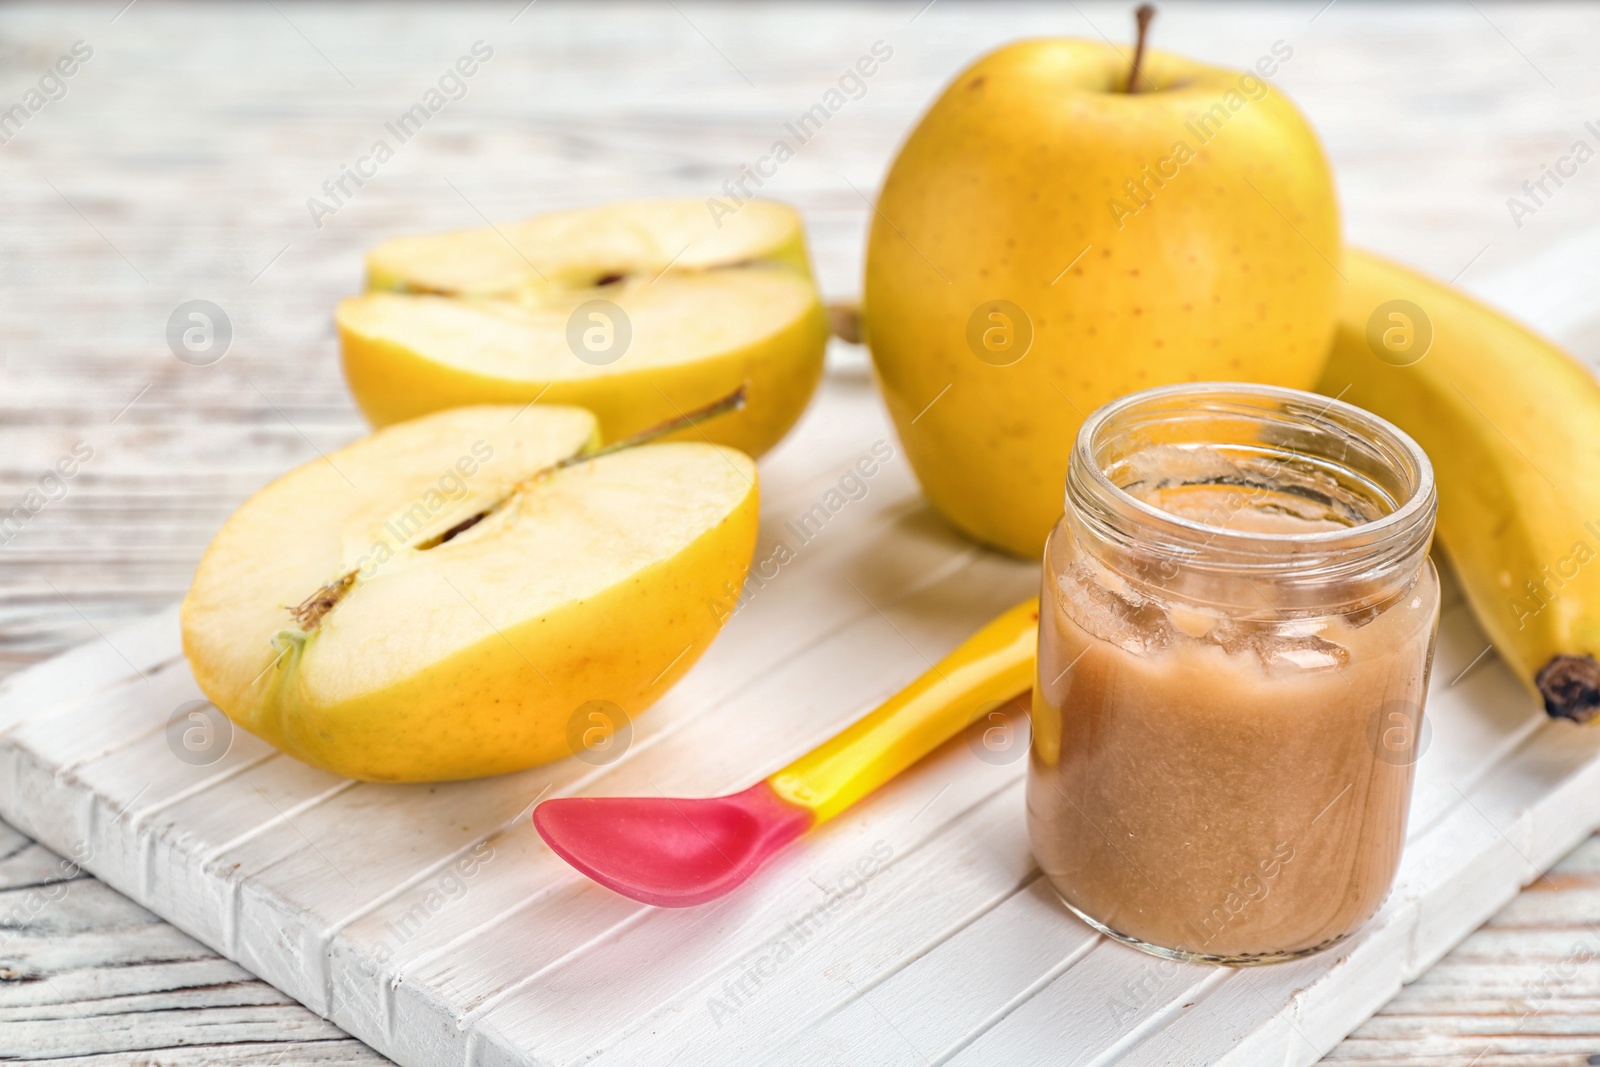 Photo of Jar with healthy baby food and apple on wooden board